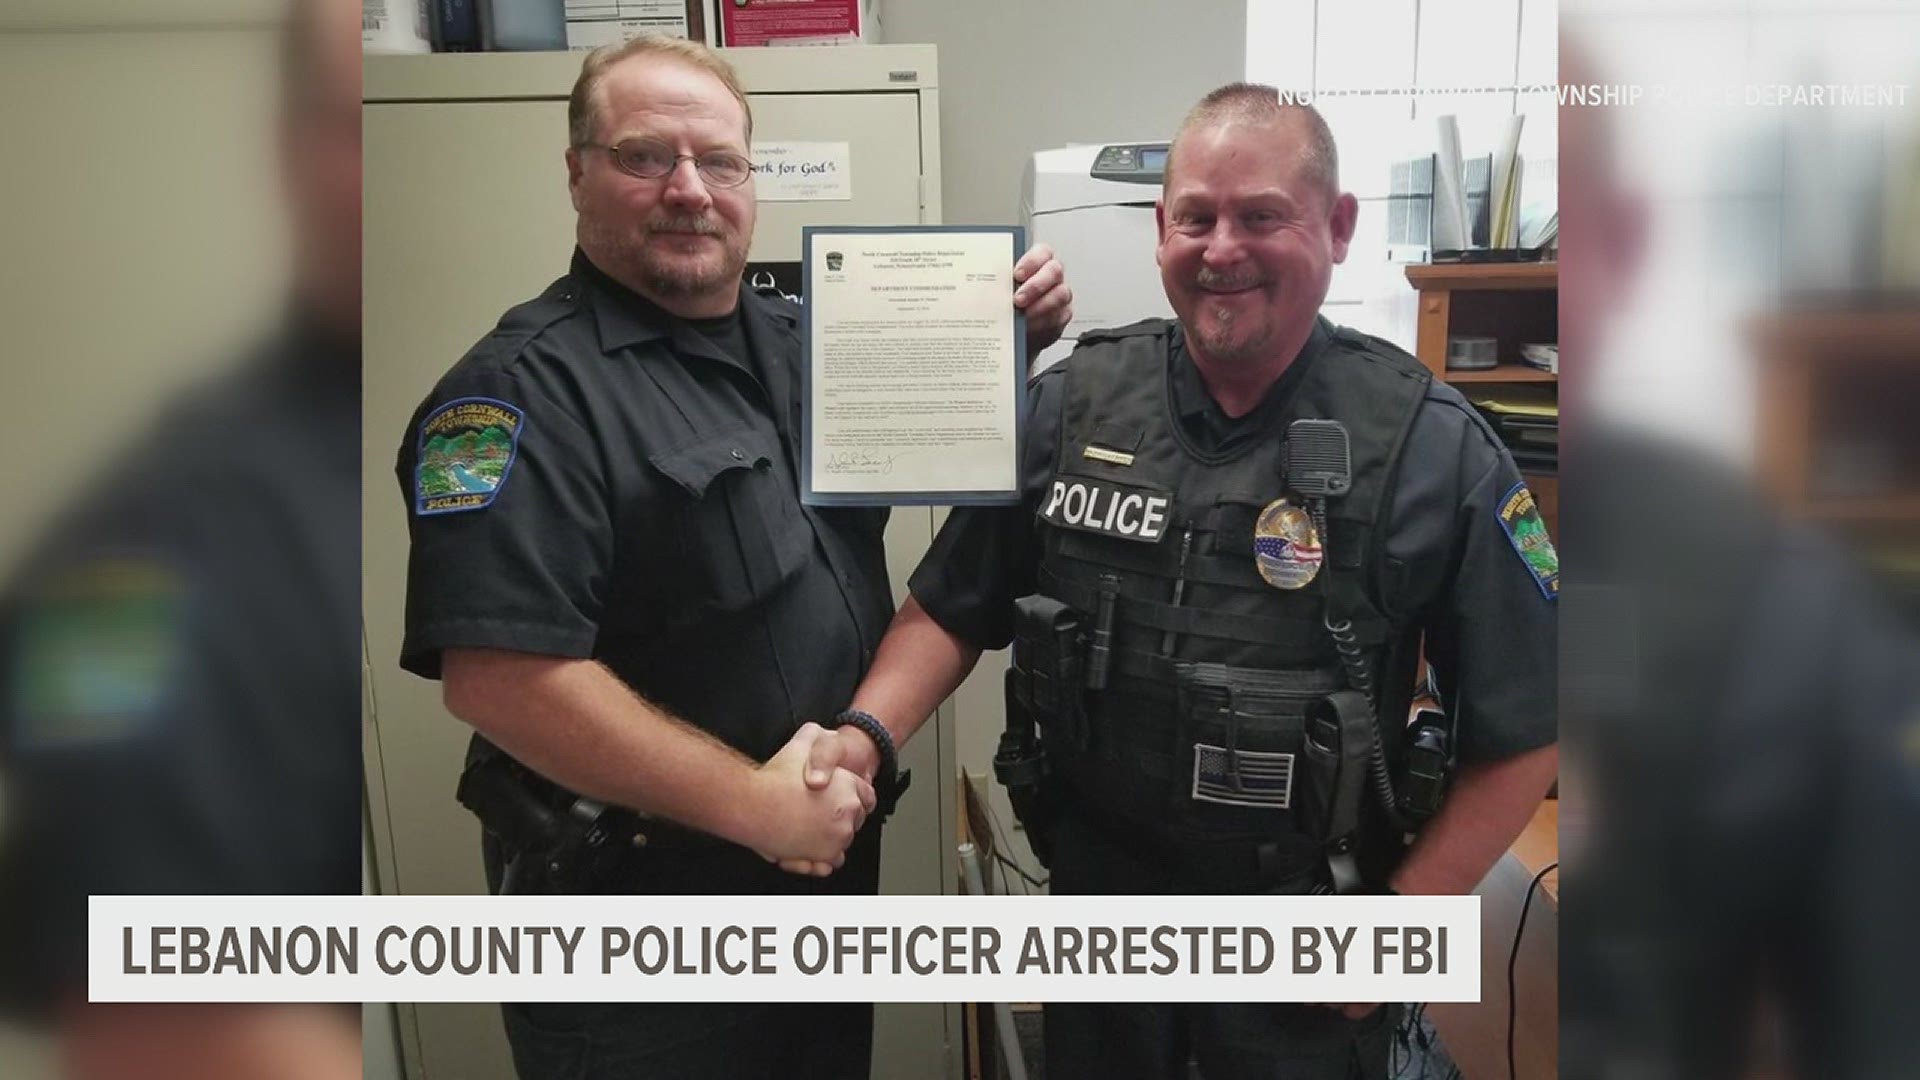 A North Cornwall Township police officer is now under arrest by the FBI, charged with numerous offenses for his involvement in the u-s capitol attack last month.